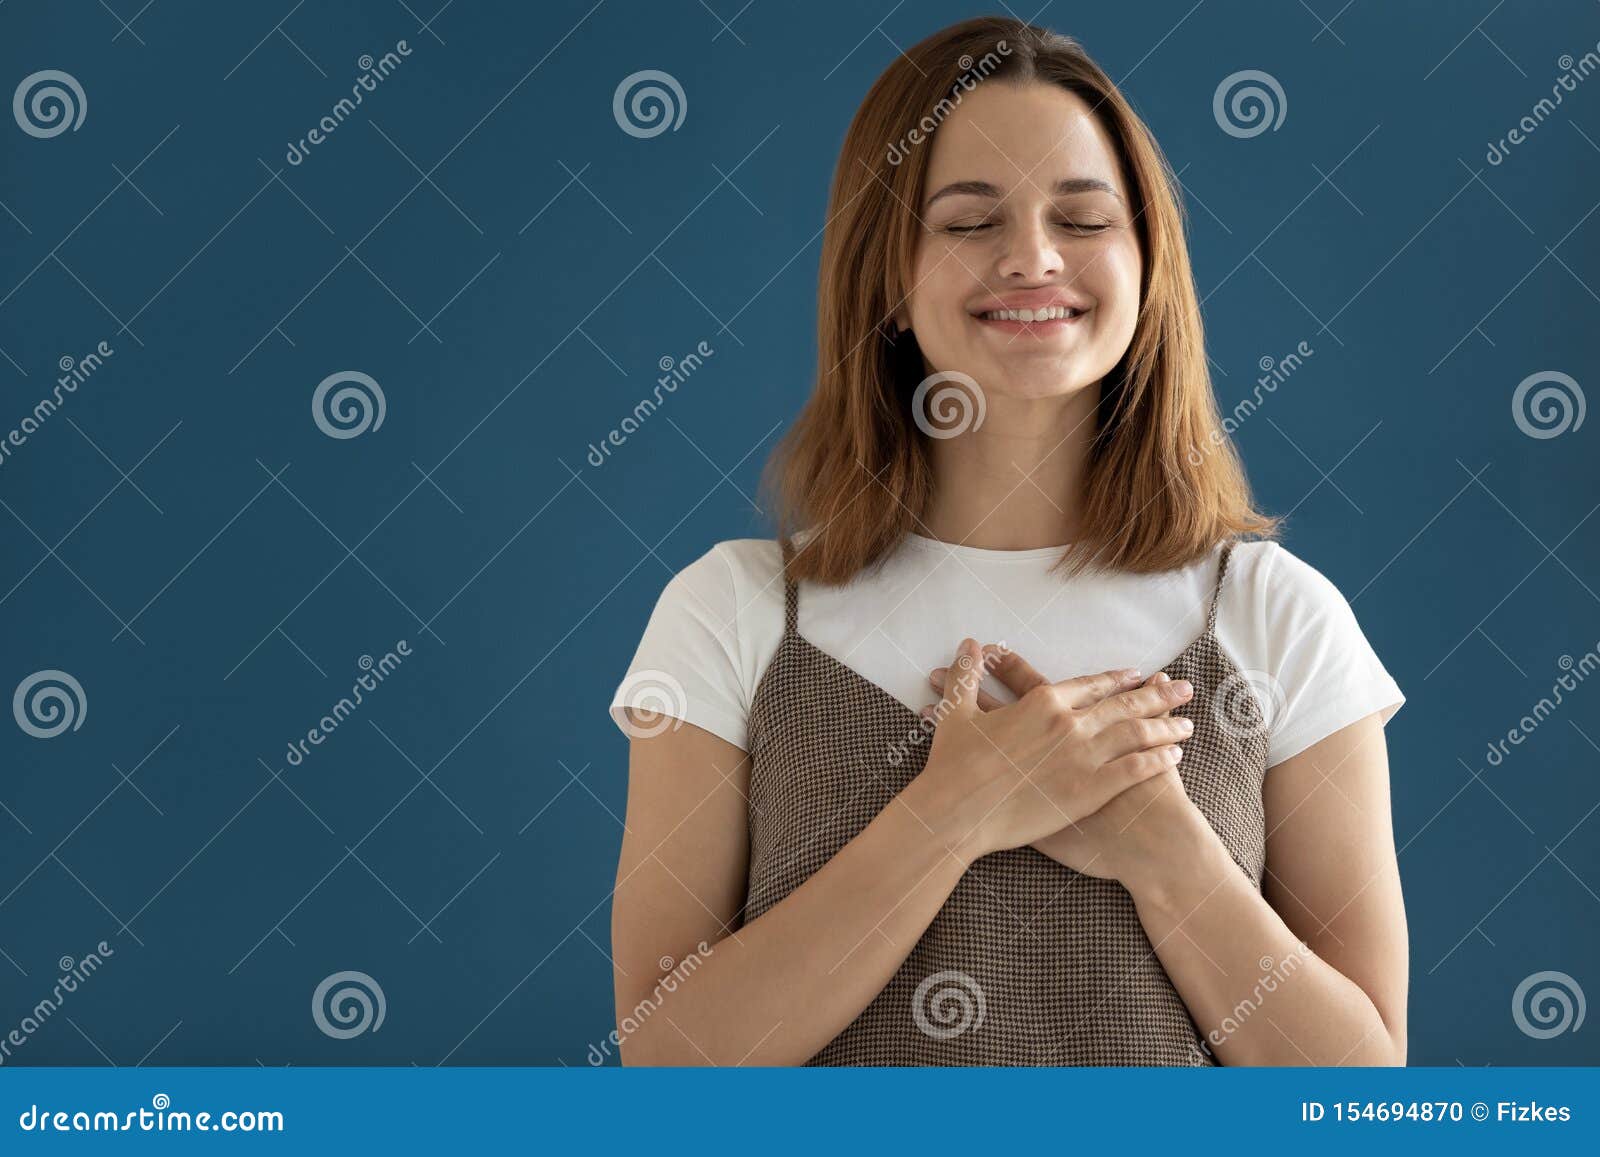 woman putting hands on chest showing appreciation studio shot